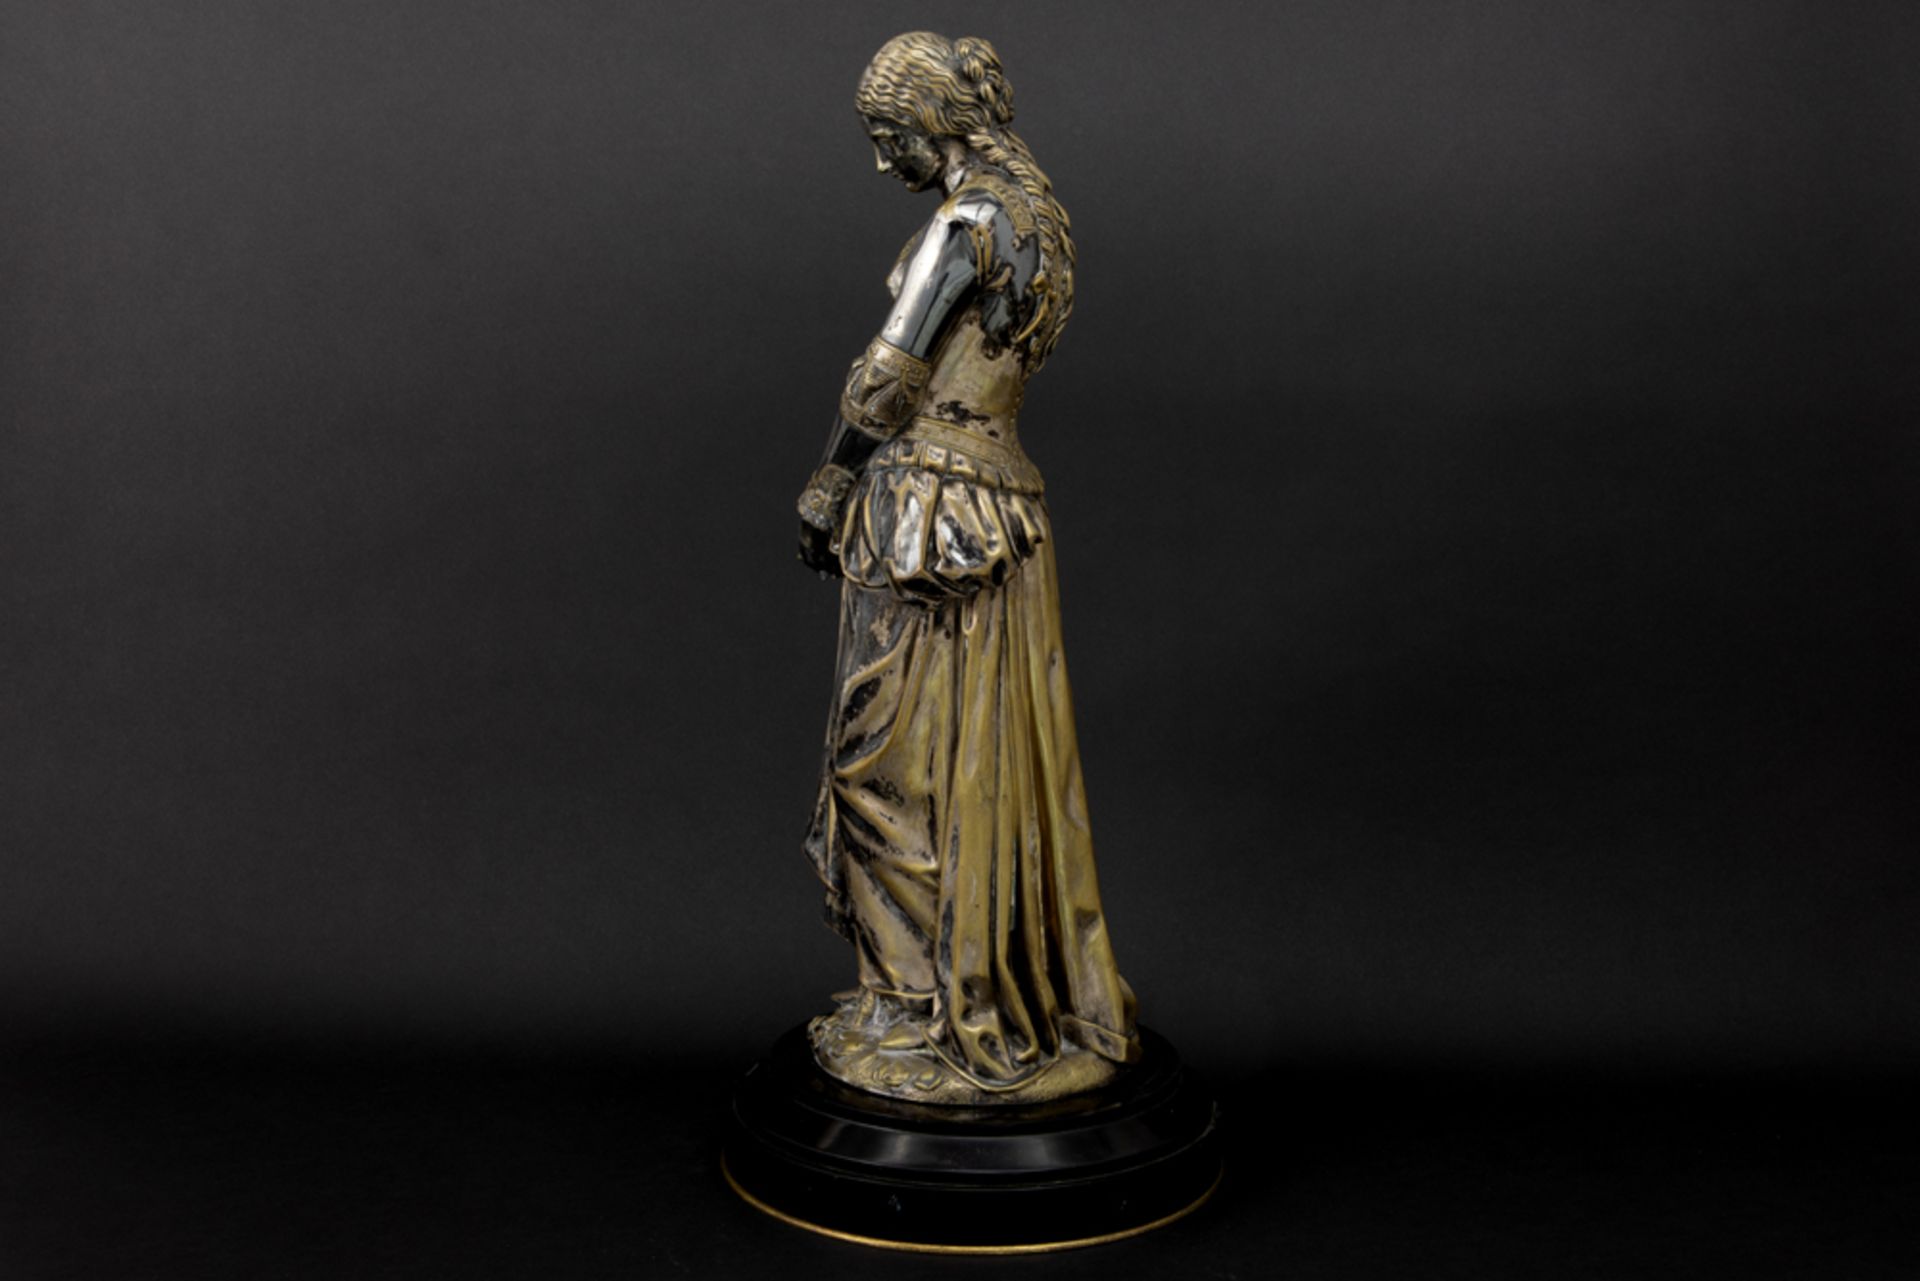 antique French sculpture in silver- and goldplated bronze - signed Emile André Boisseau and dated - Image 2 of 4